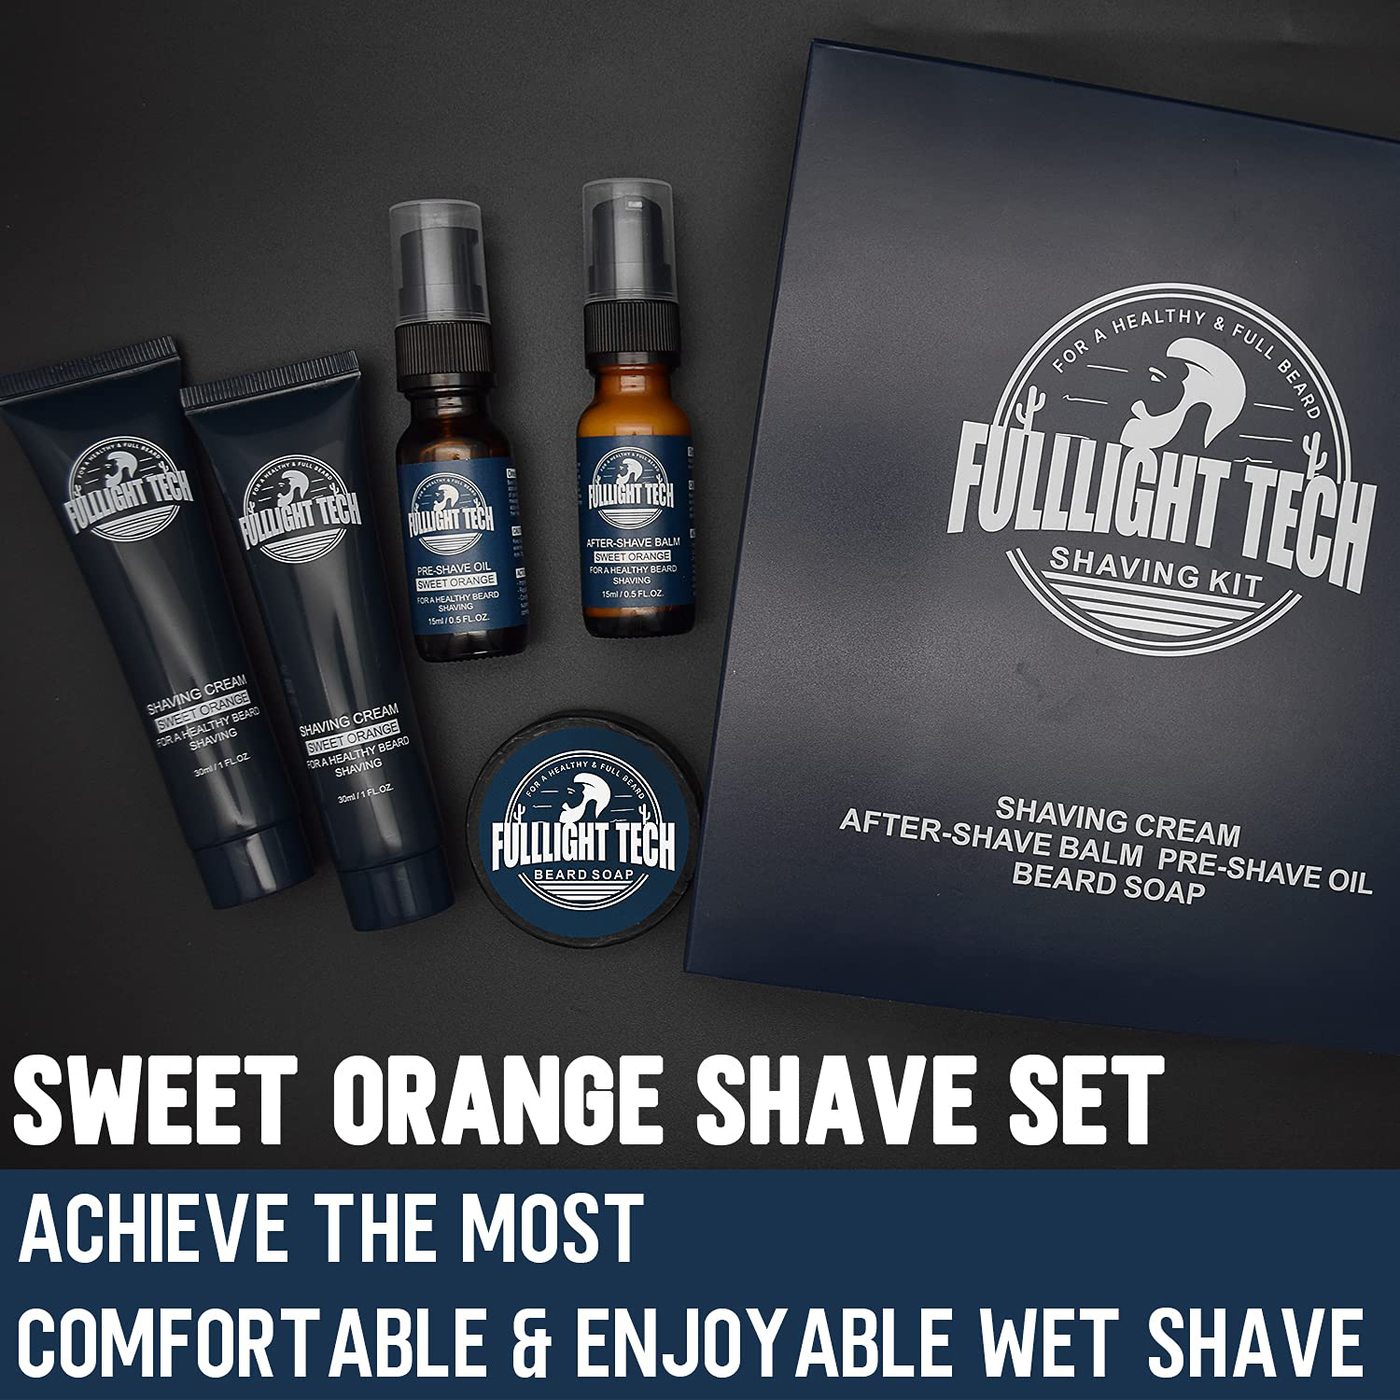 Men's 5 Piece Shaving Kit w/Shaving Soap, 2 Pack Shaving Cream, Pre-Shave Oil, and After Shave Balm